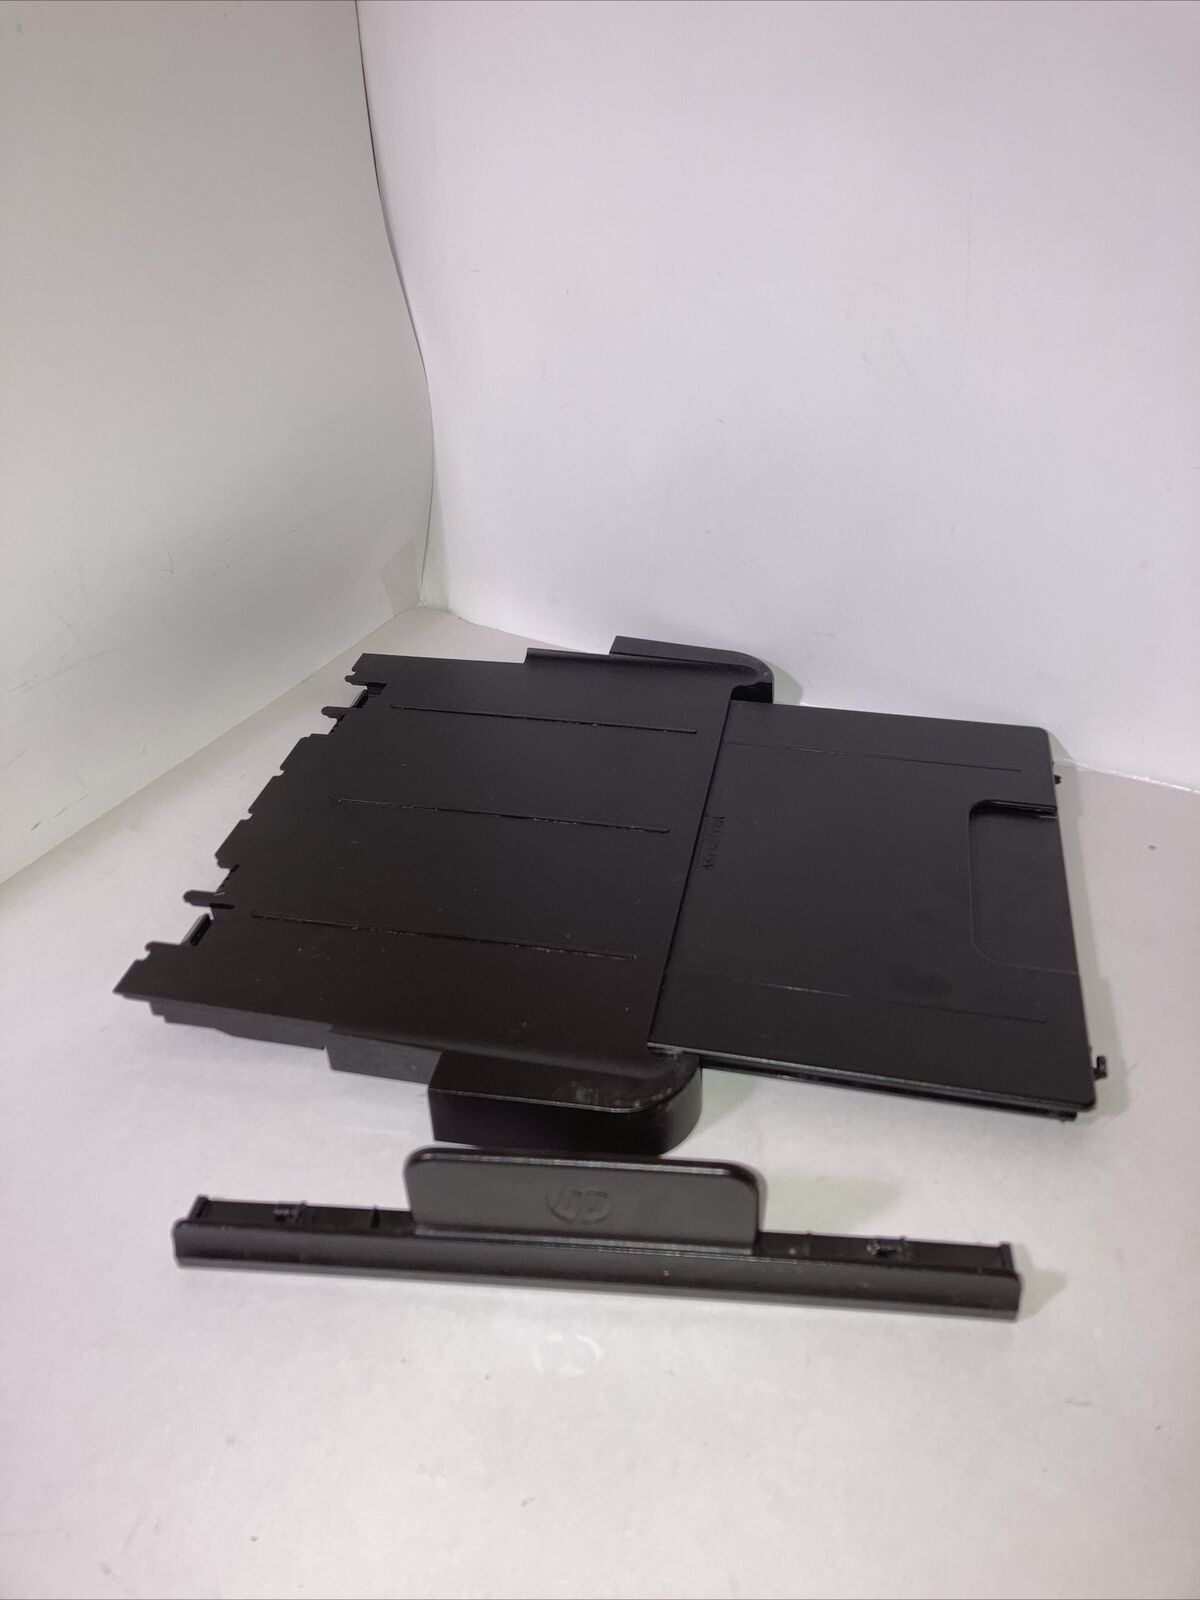 Read Hp Officejet 8600 Pro Cm749-40024 Printer Output Paper Stopper Catch Tray